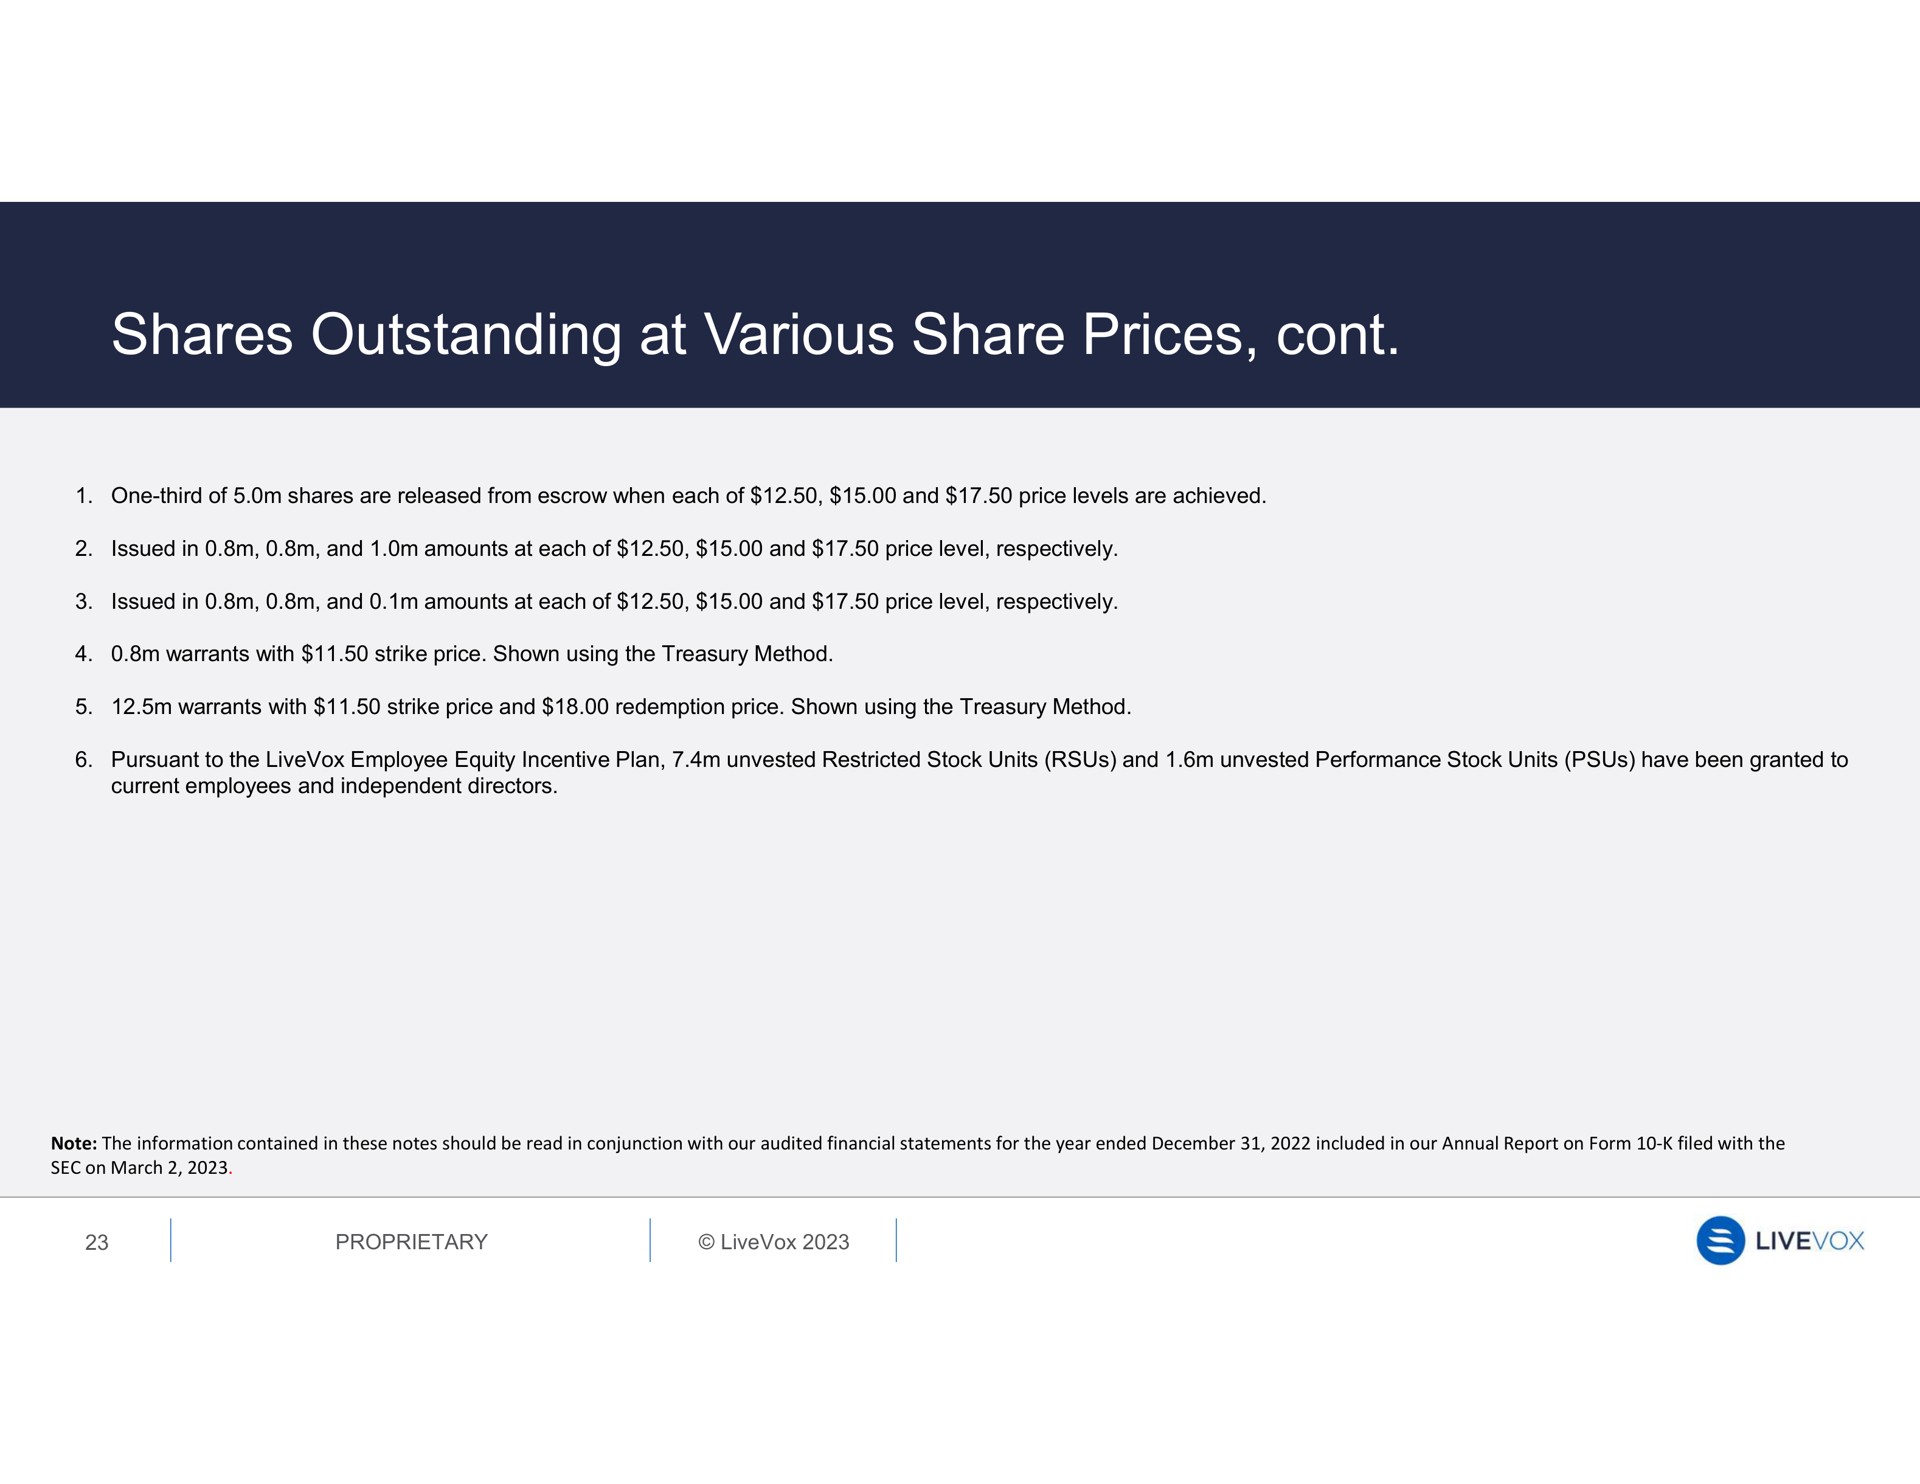 shares outstanding at various share prices | LiveVox